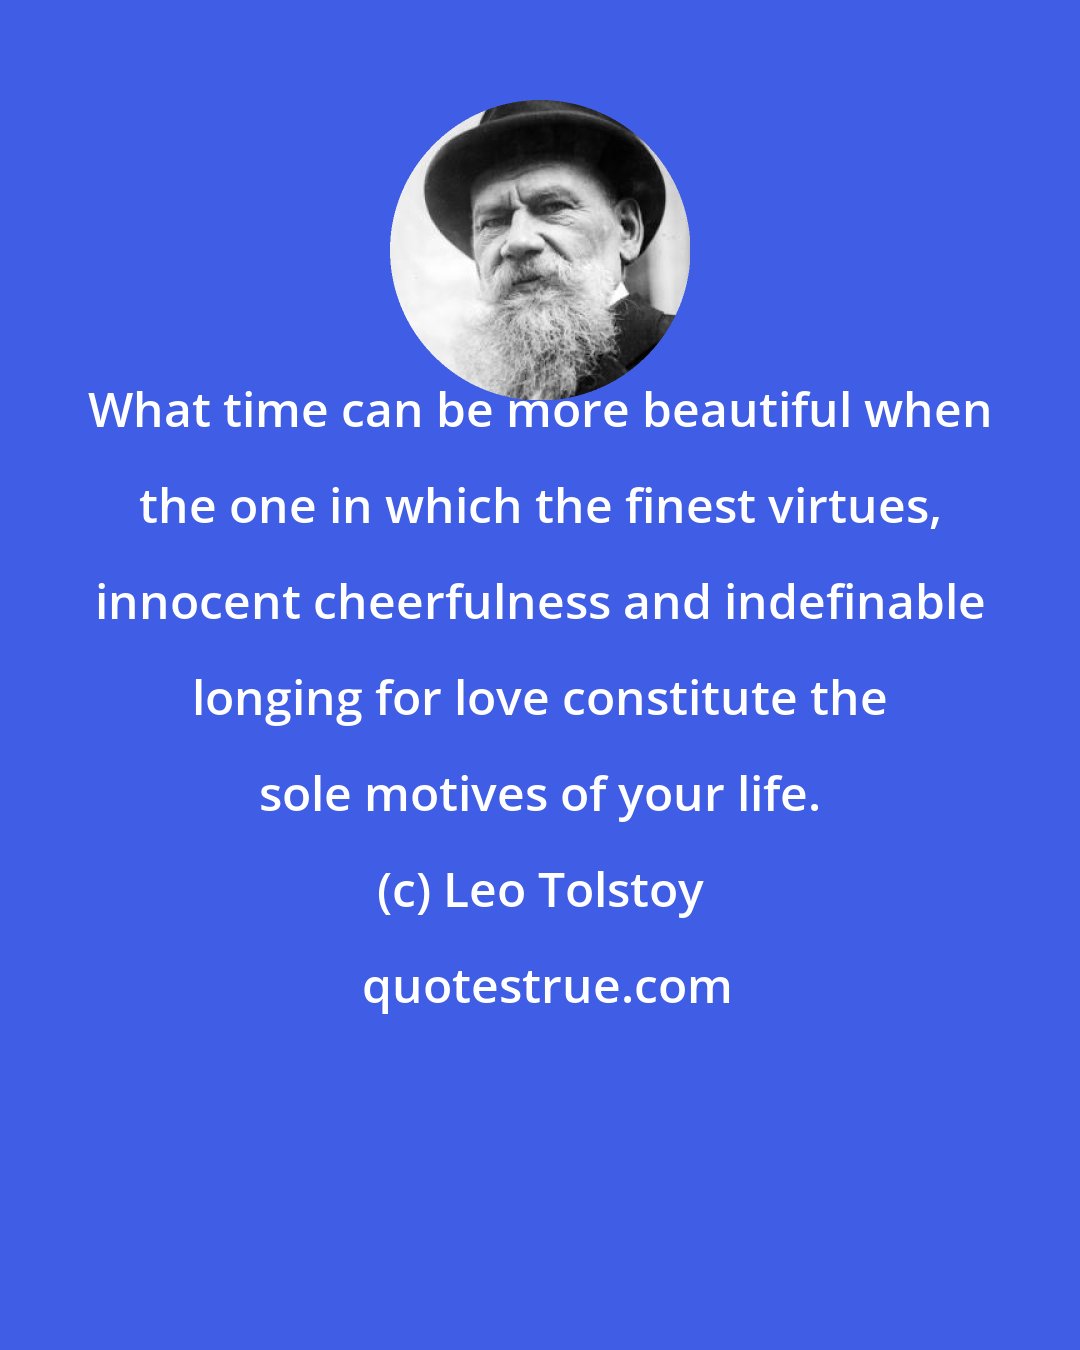 Leo Tolstoy: What time can be more beautiful when the one in which the finest virtues, innocent cheerfulness and indefinable longing for love constitute the sole motives of your life.